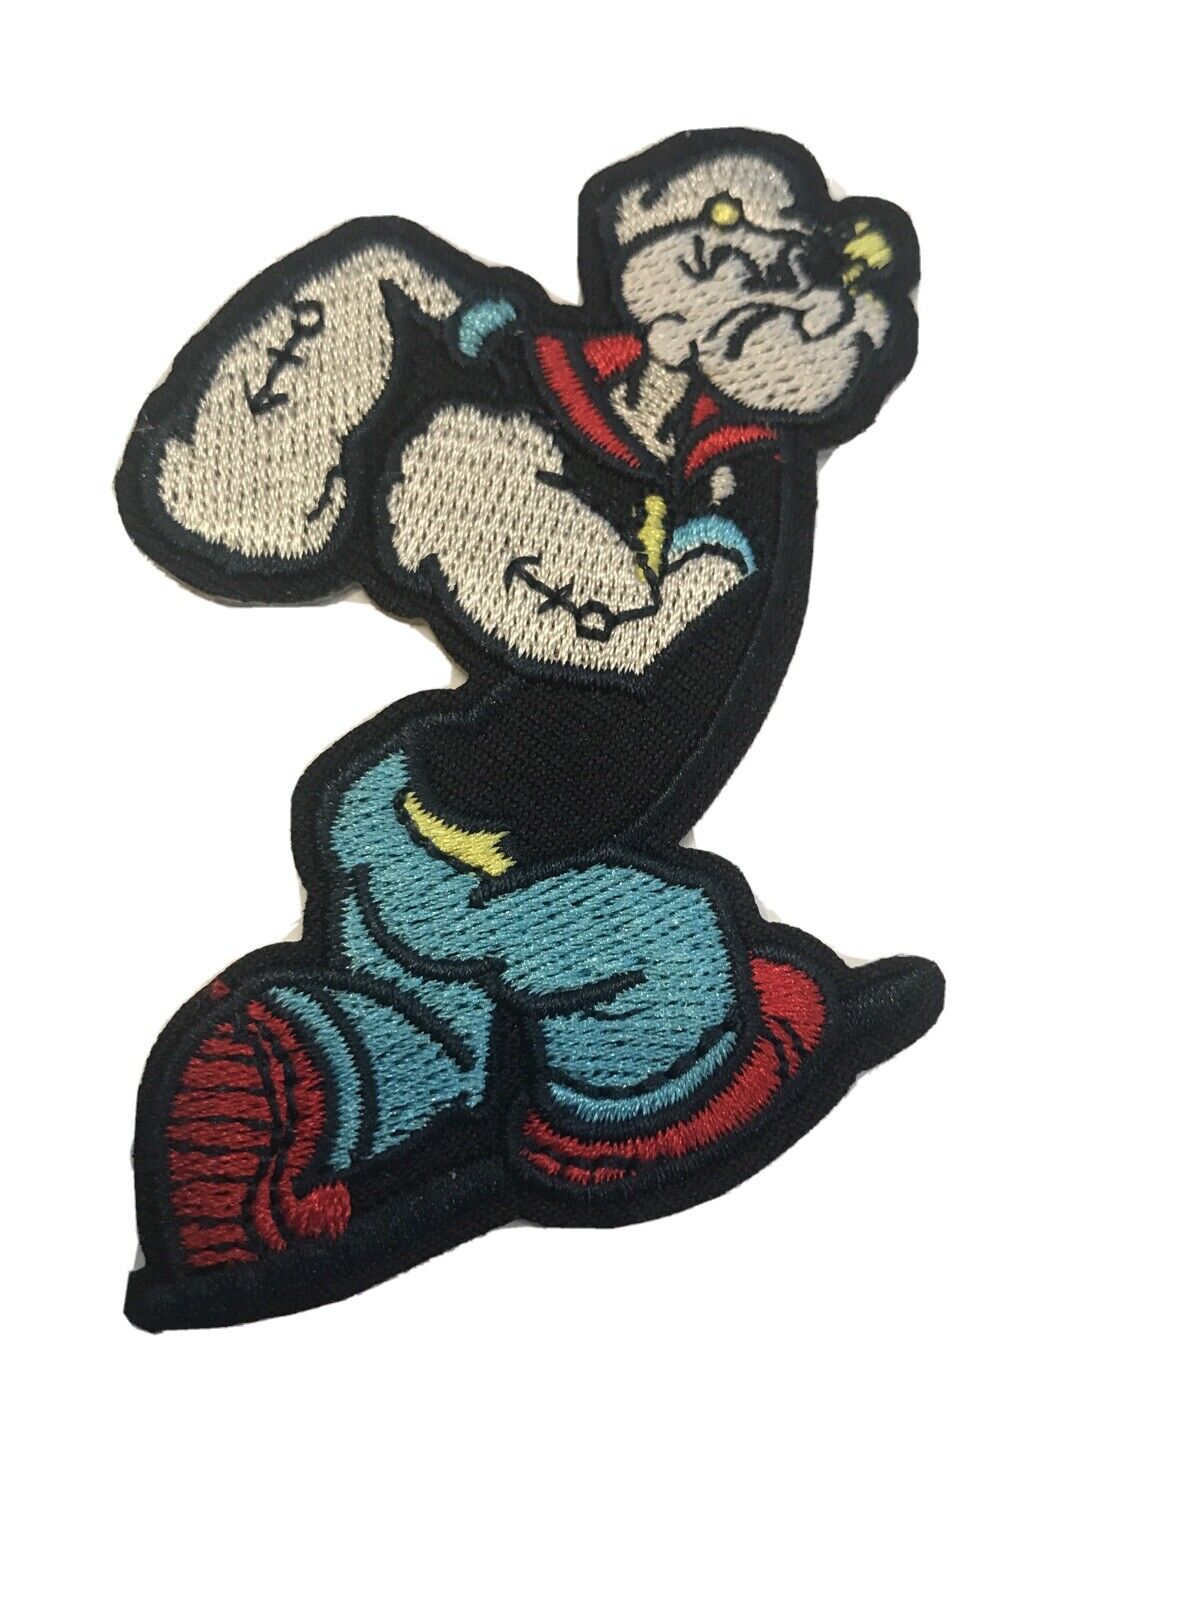 Popeye The Sailor Man Embroidered Iron On Patch 3.5” X 2”